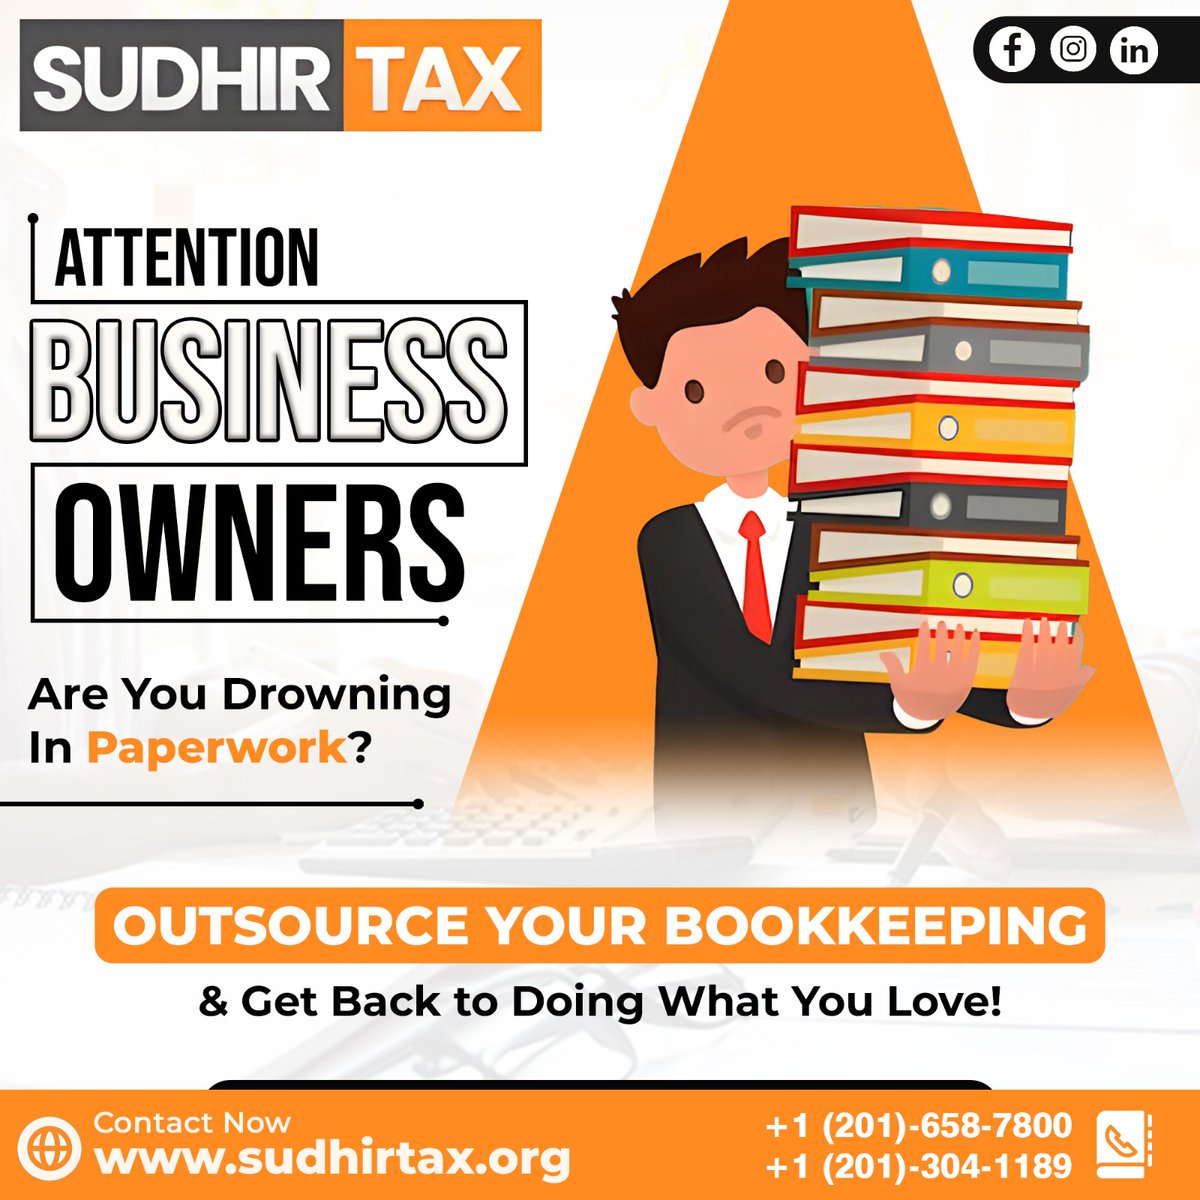 Is paperwork bogging you down? 

Outsource your bookkeeping to Sudhir Tax LLC and regain control of your time. 

Focus on what truly matters - growing your business.

#bookkeeping #outsourcing #businesswwners #sudhirtax #priyagupta #paperworkrelief #bookkeepingsolutions